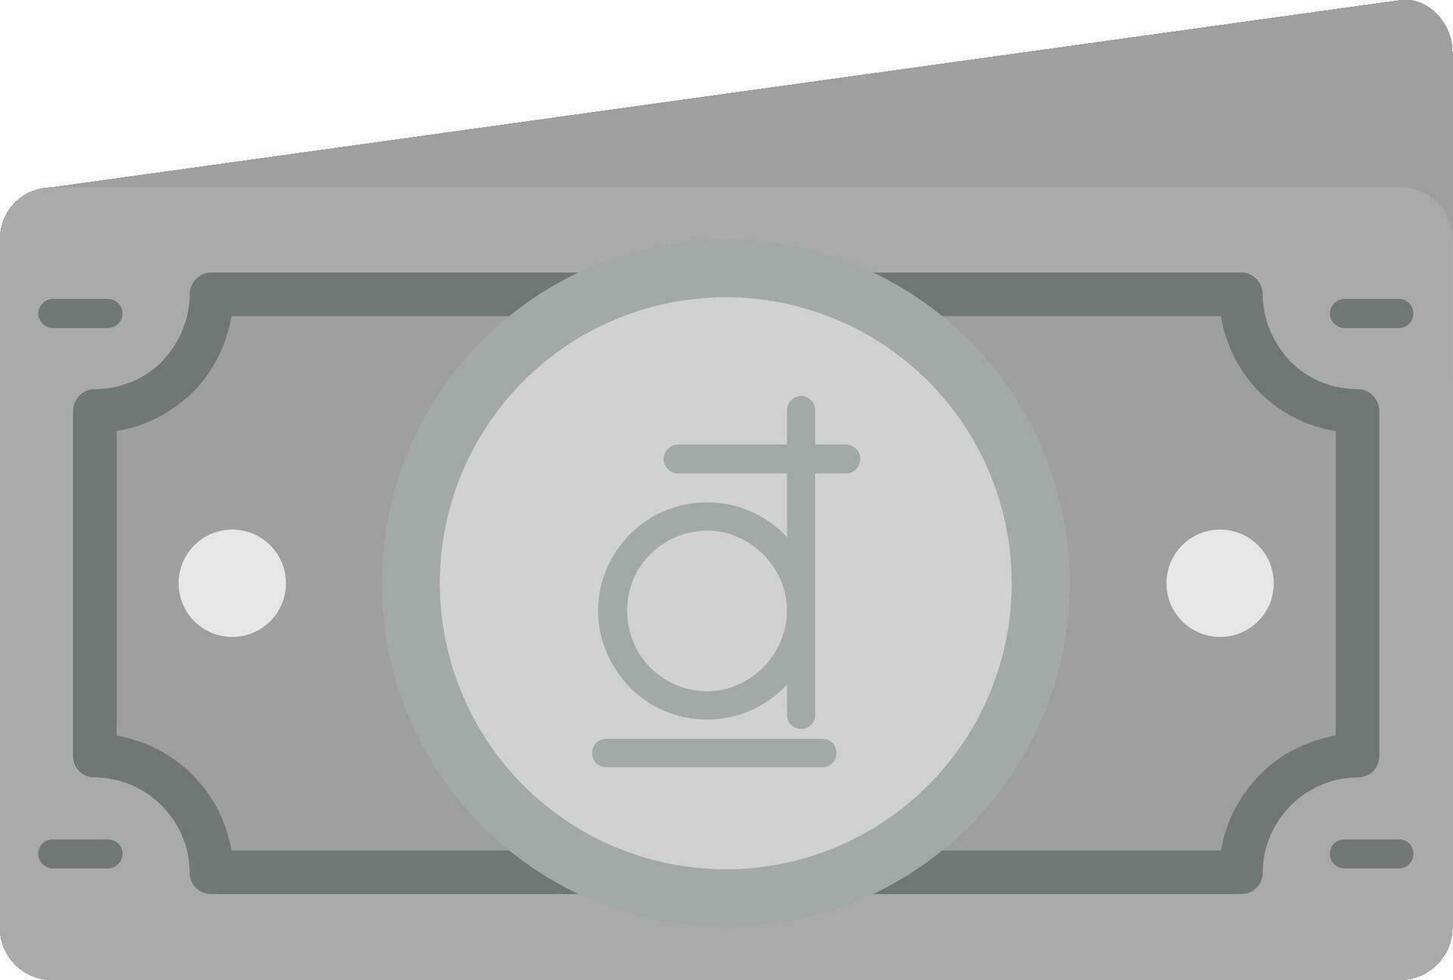 Dong Grey scale Icon vector